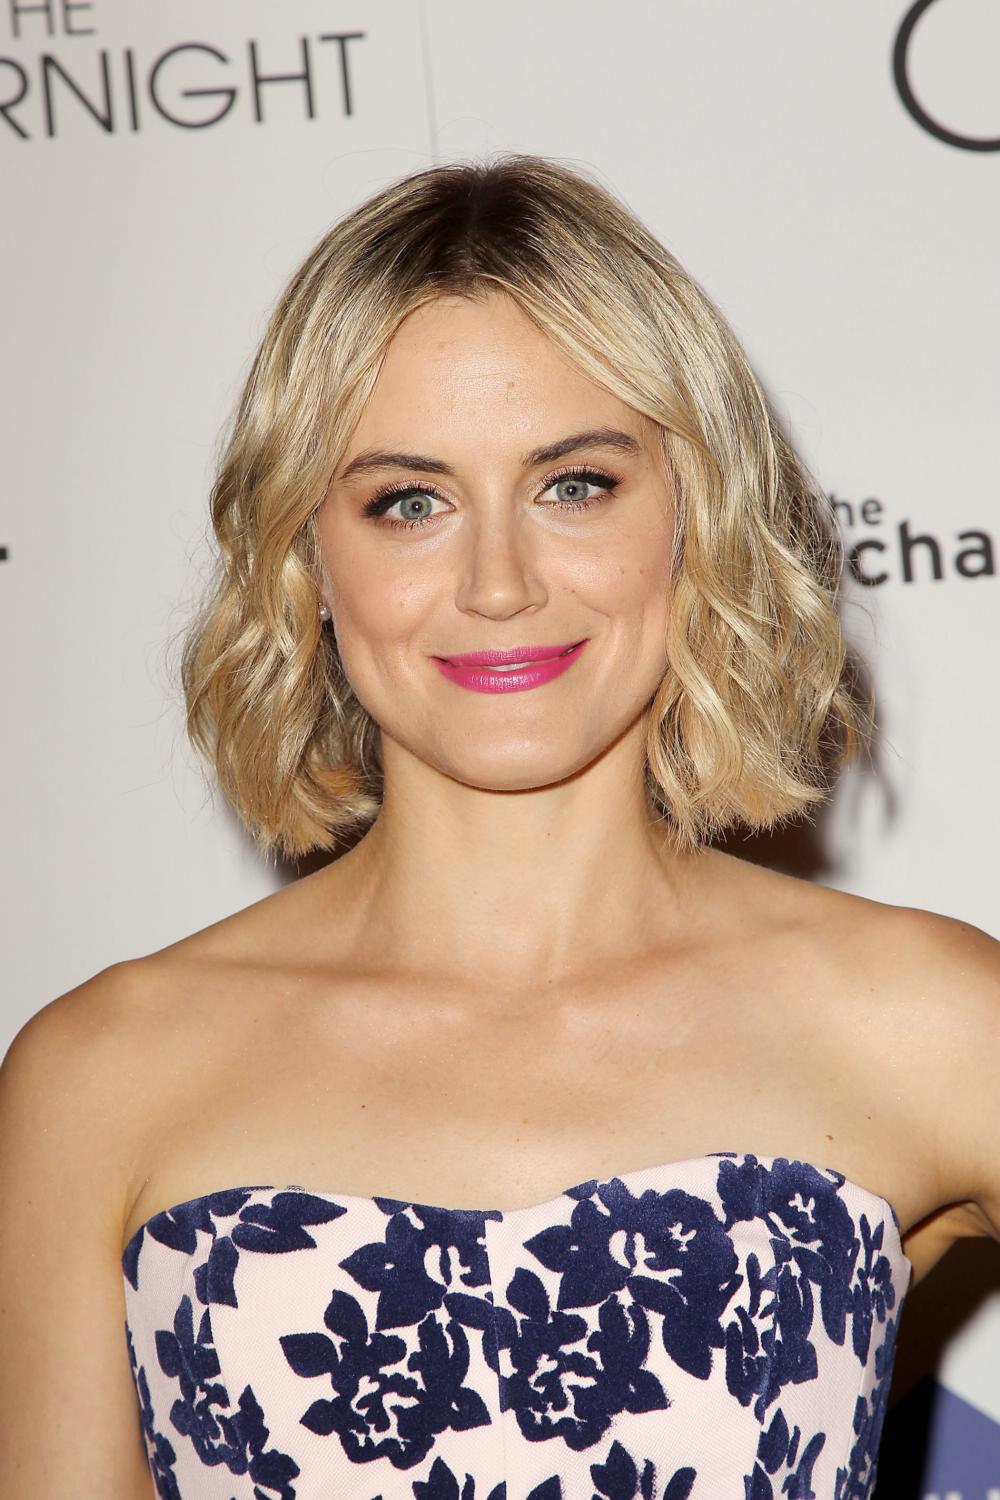 Taylor Schilling at The Overnight NY Premiere